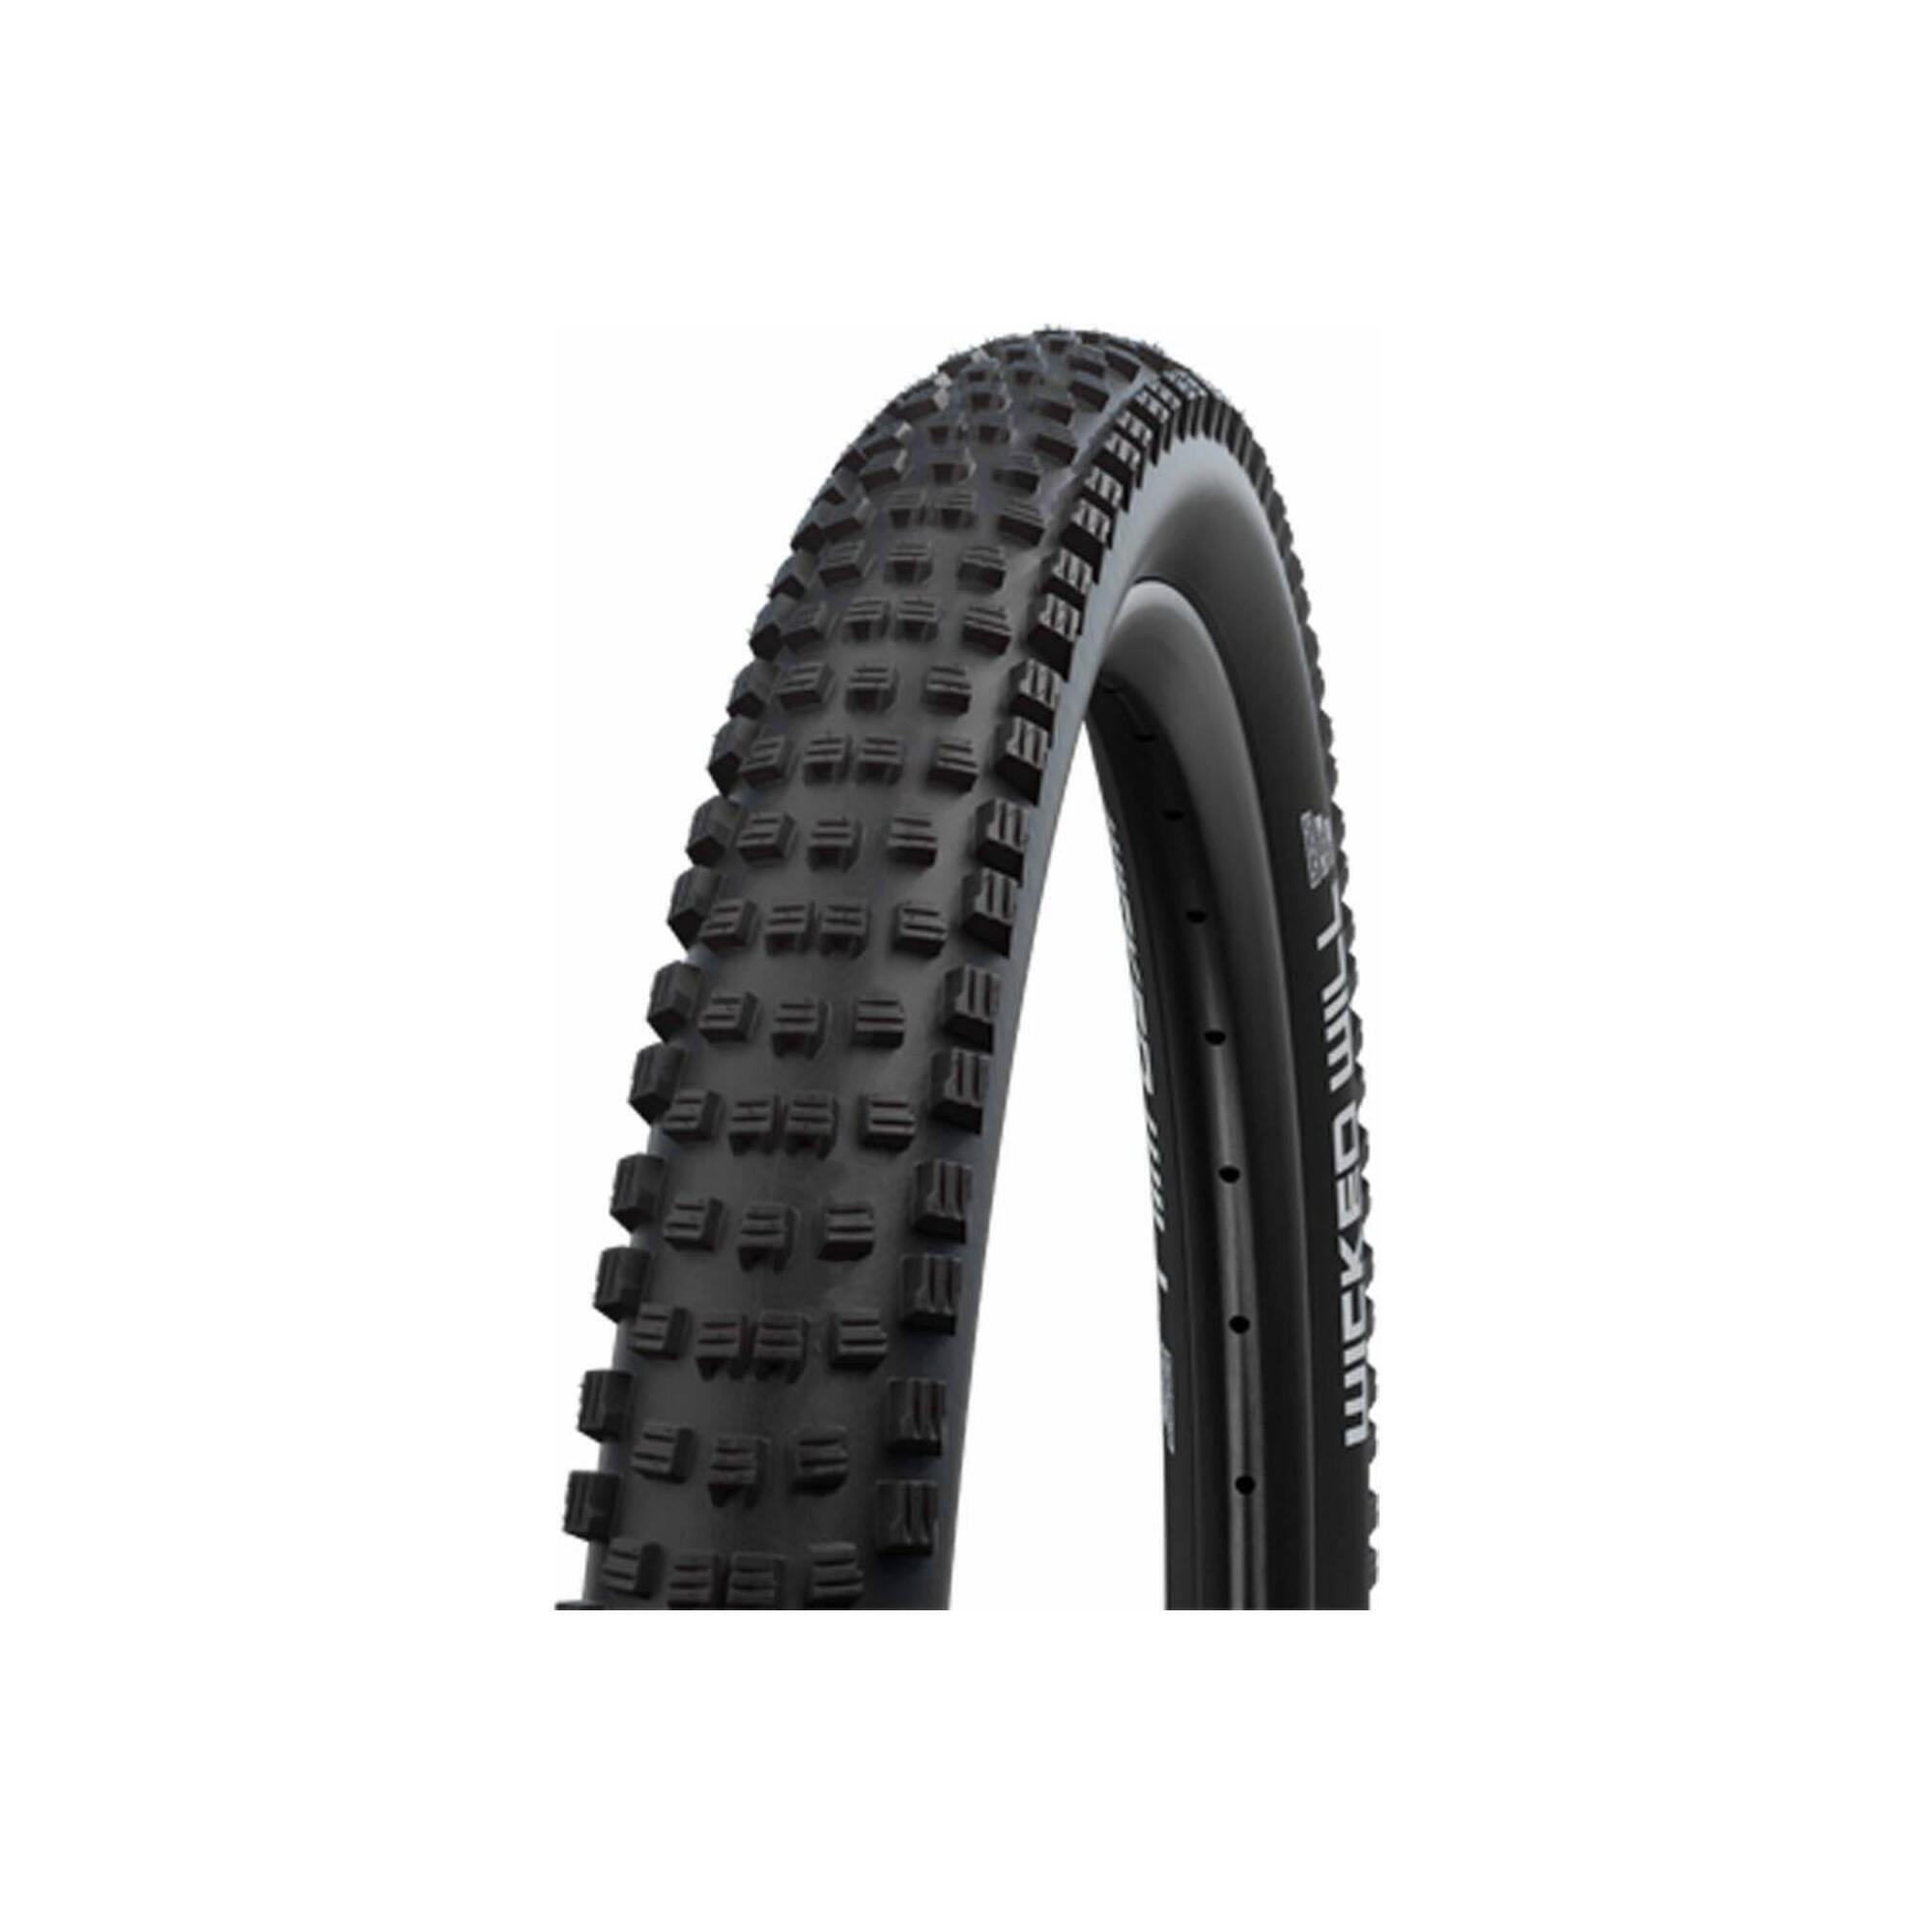 Schwalbe WICKED WILL PERF TLR 27.5 x 2.40 650B Black Tyre 1/2